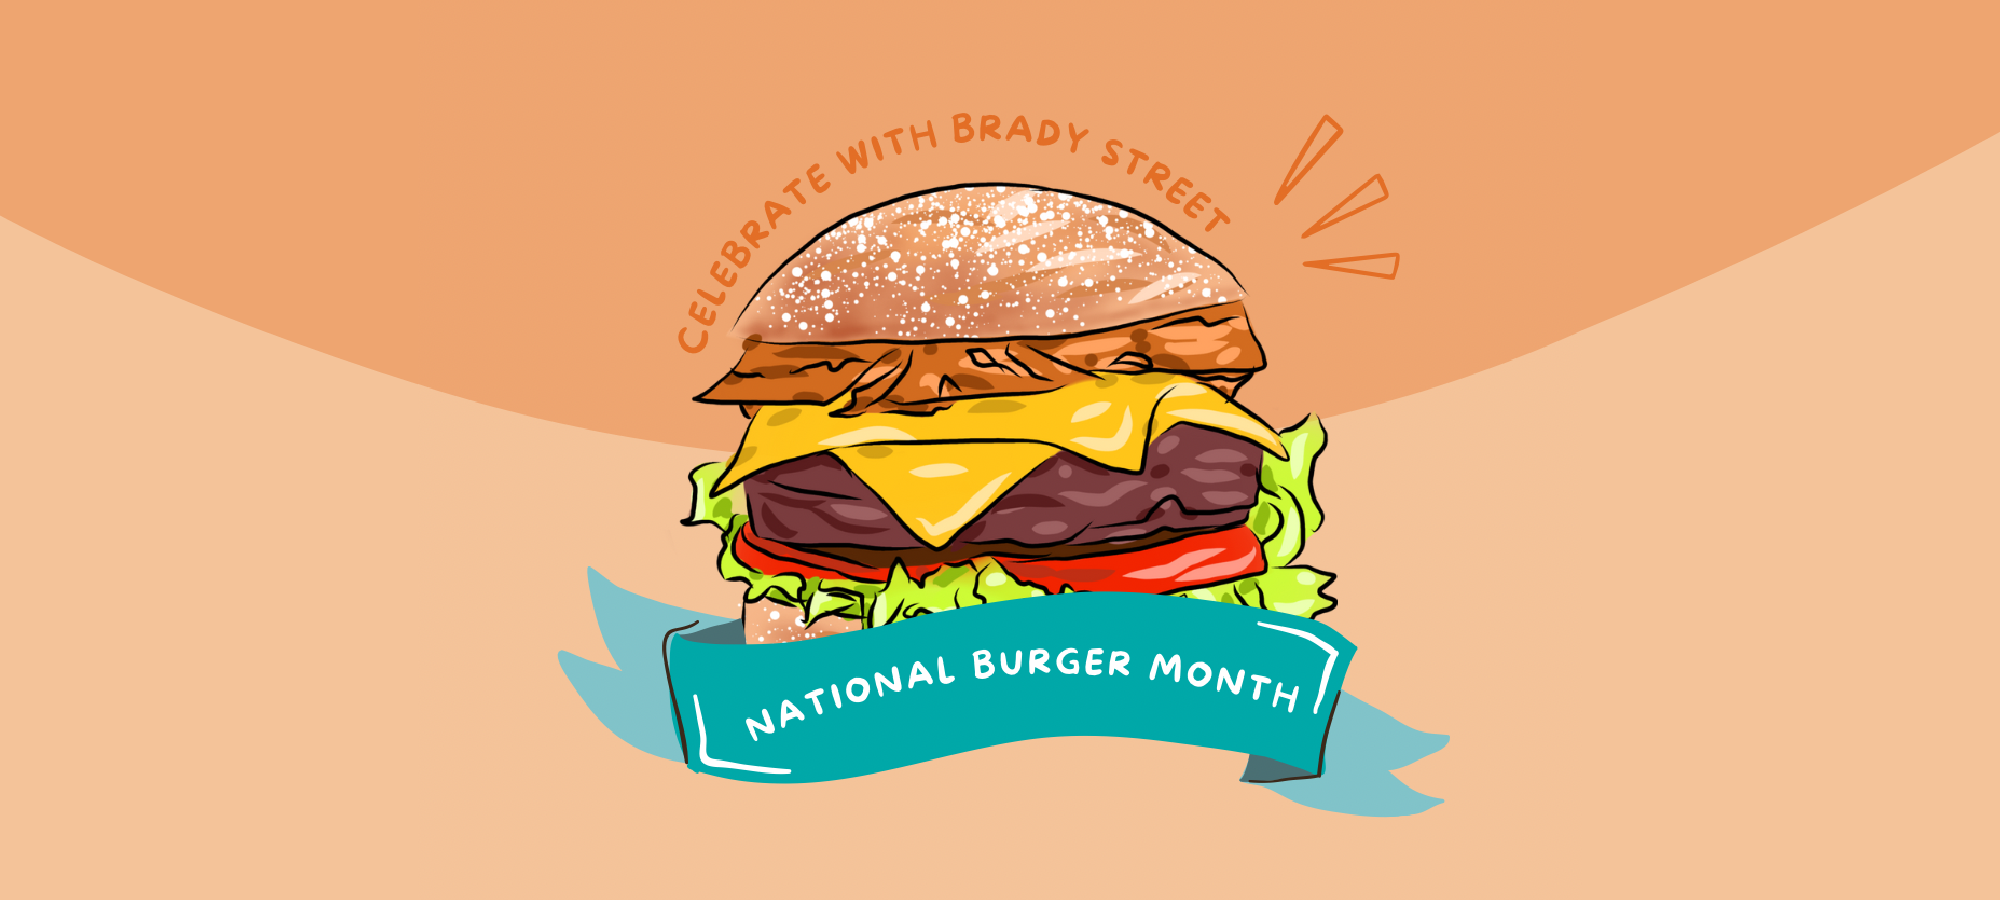 There are many ways to celebrate “National Burger Month” on Brady Street